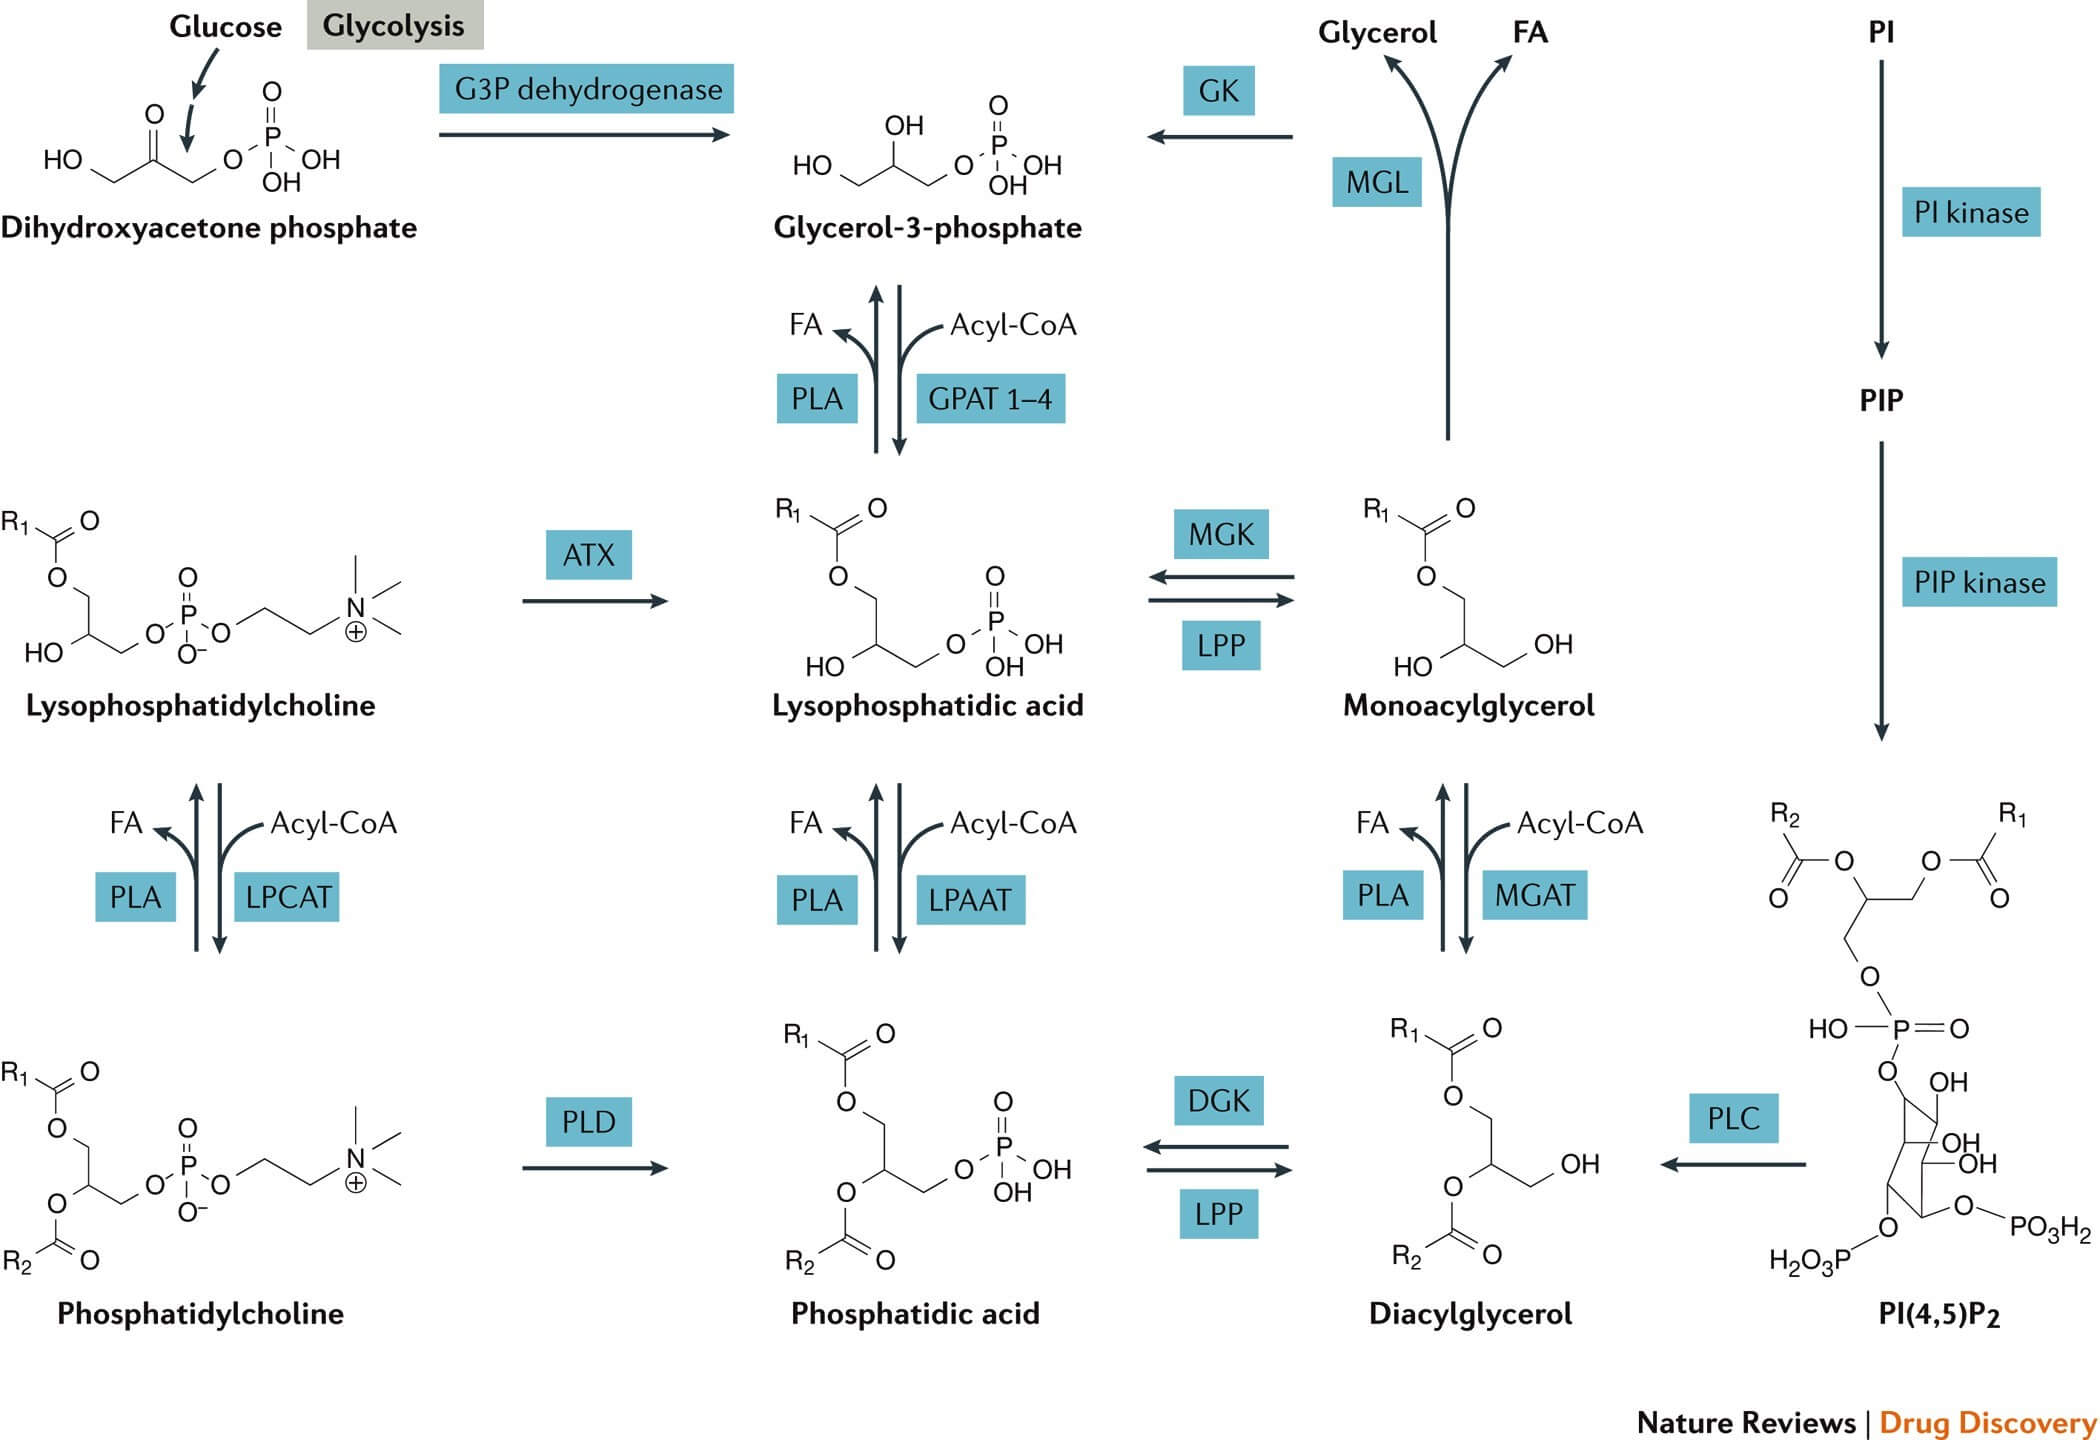 Metabolic pathways that lead to the generation of phosphatidic acid (PtdOH) include de novo biosynthesis as well as the phospholipase D (PLD) and PLC-diacylglycerol kinase (DGK)-mediated signalling pathways